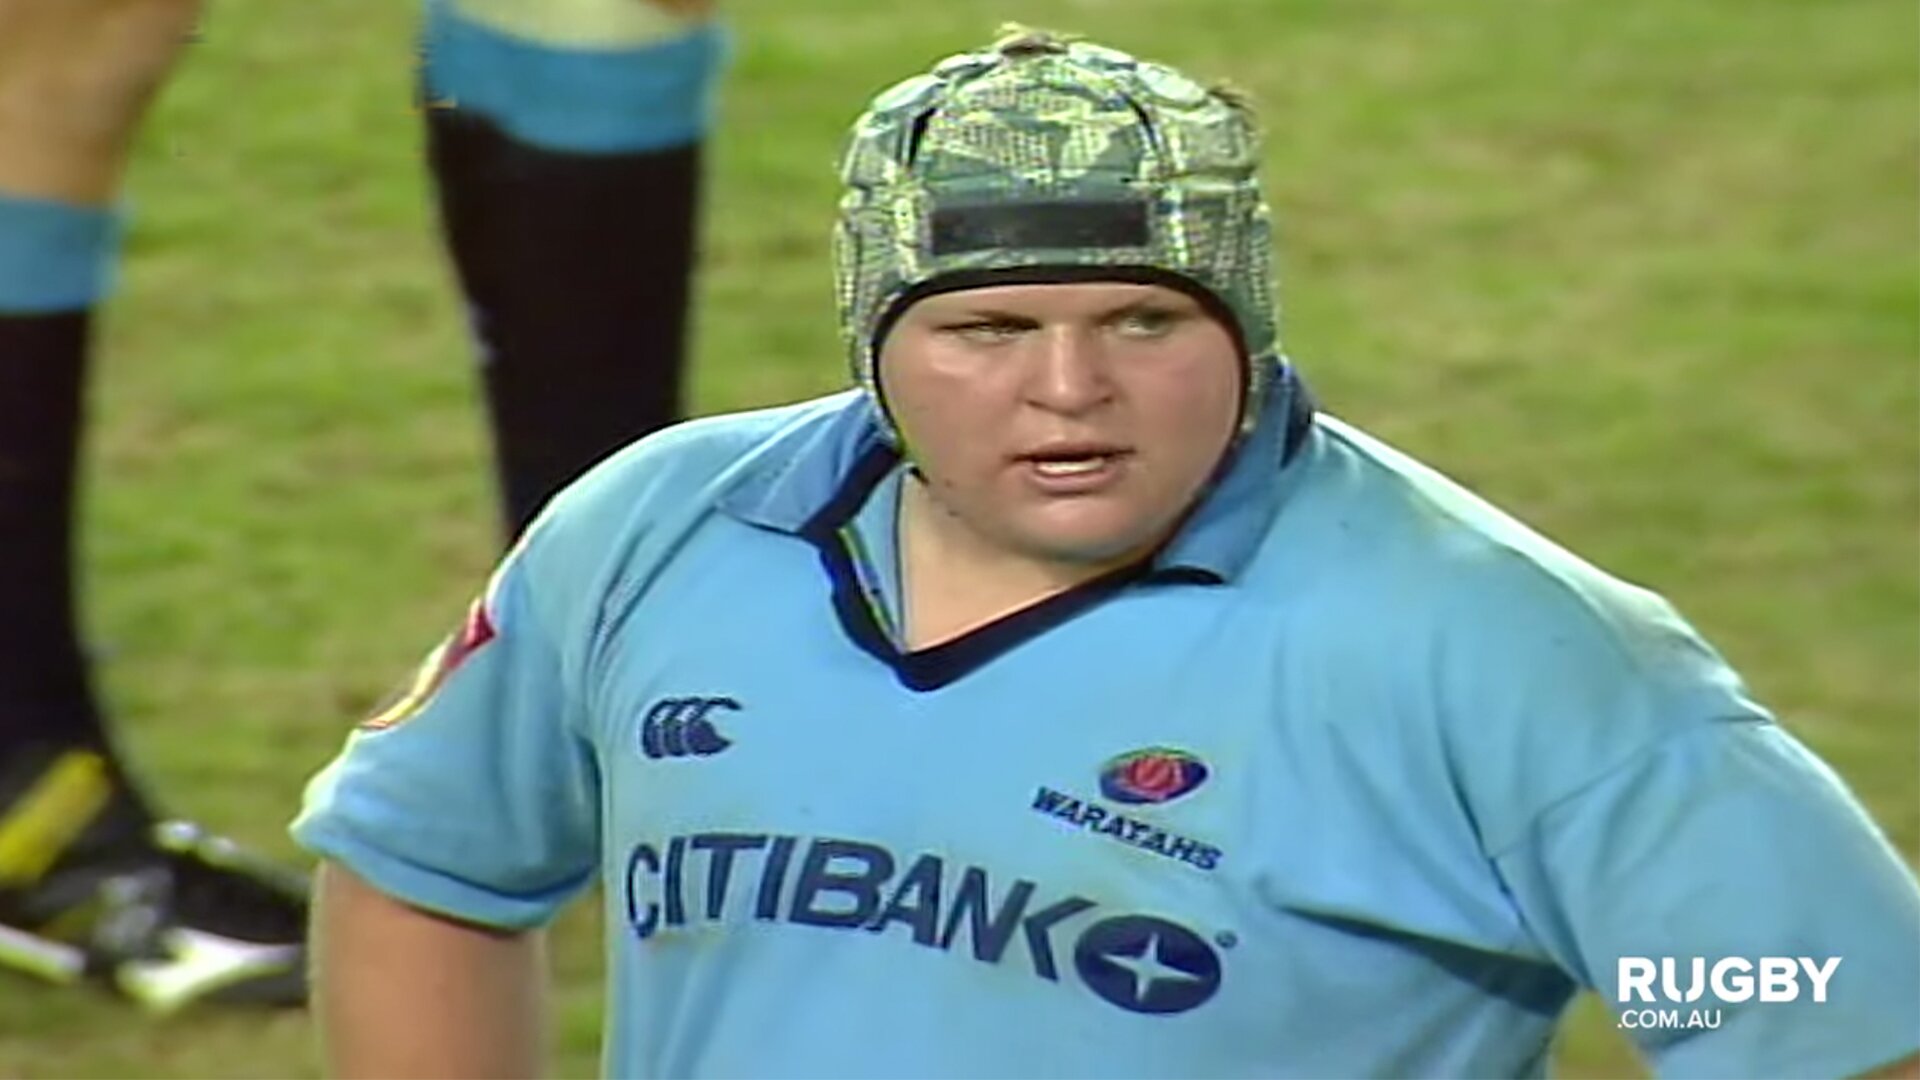 The incredible weight loss of one of the best props in rugby history